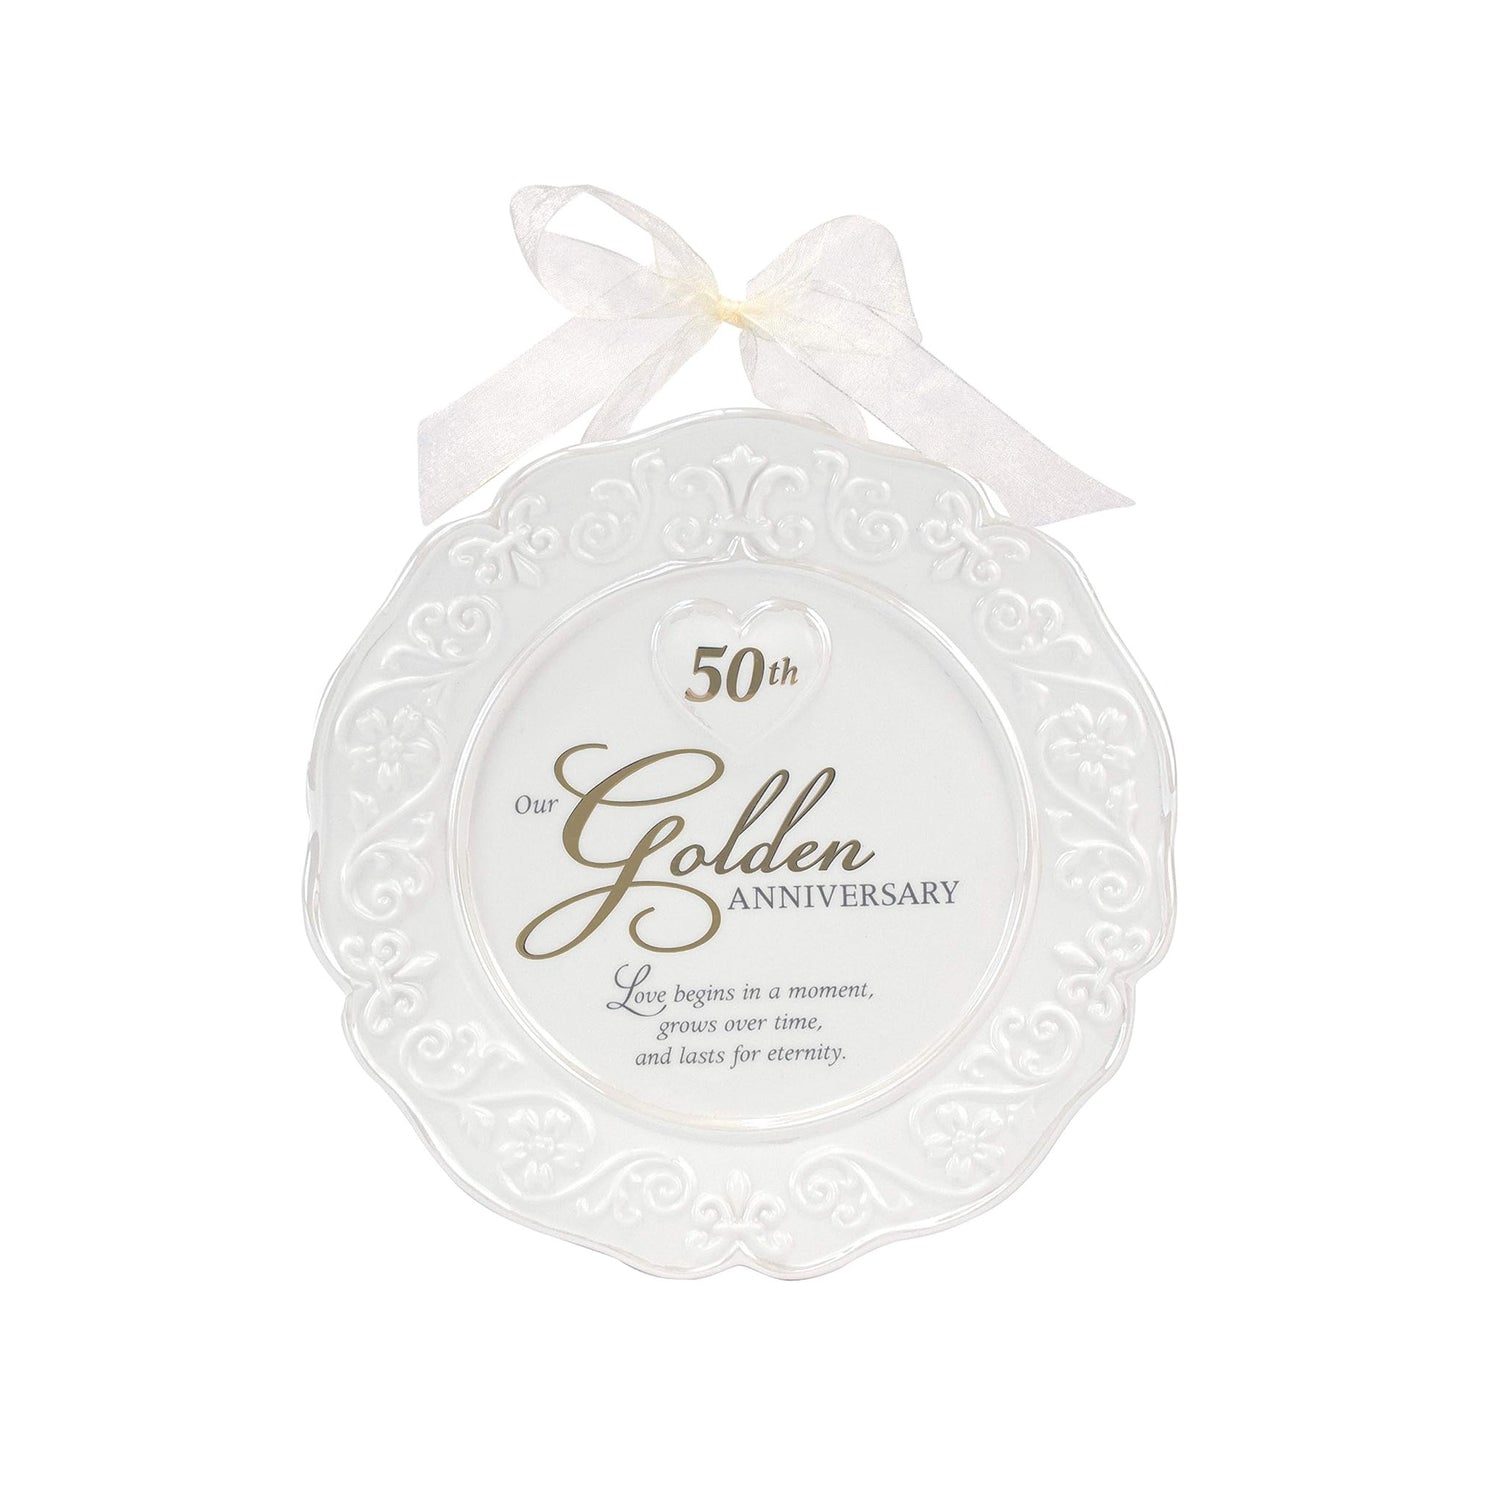 Malden 50th Anniversary Ceramic Plate with Wall Hanging Ribbon